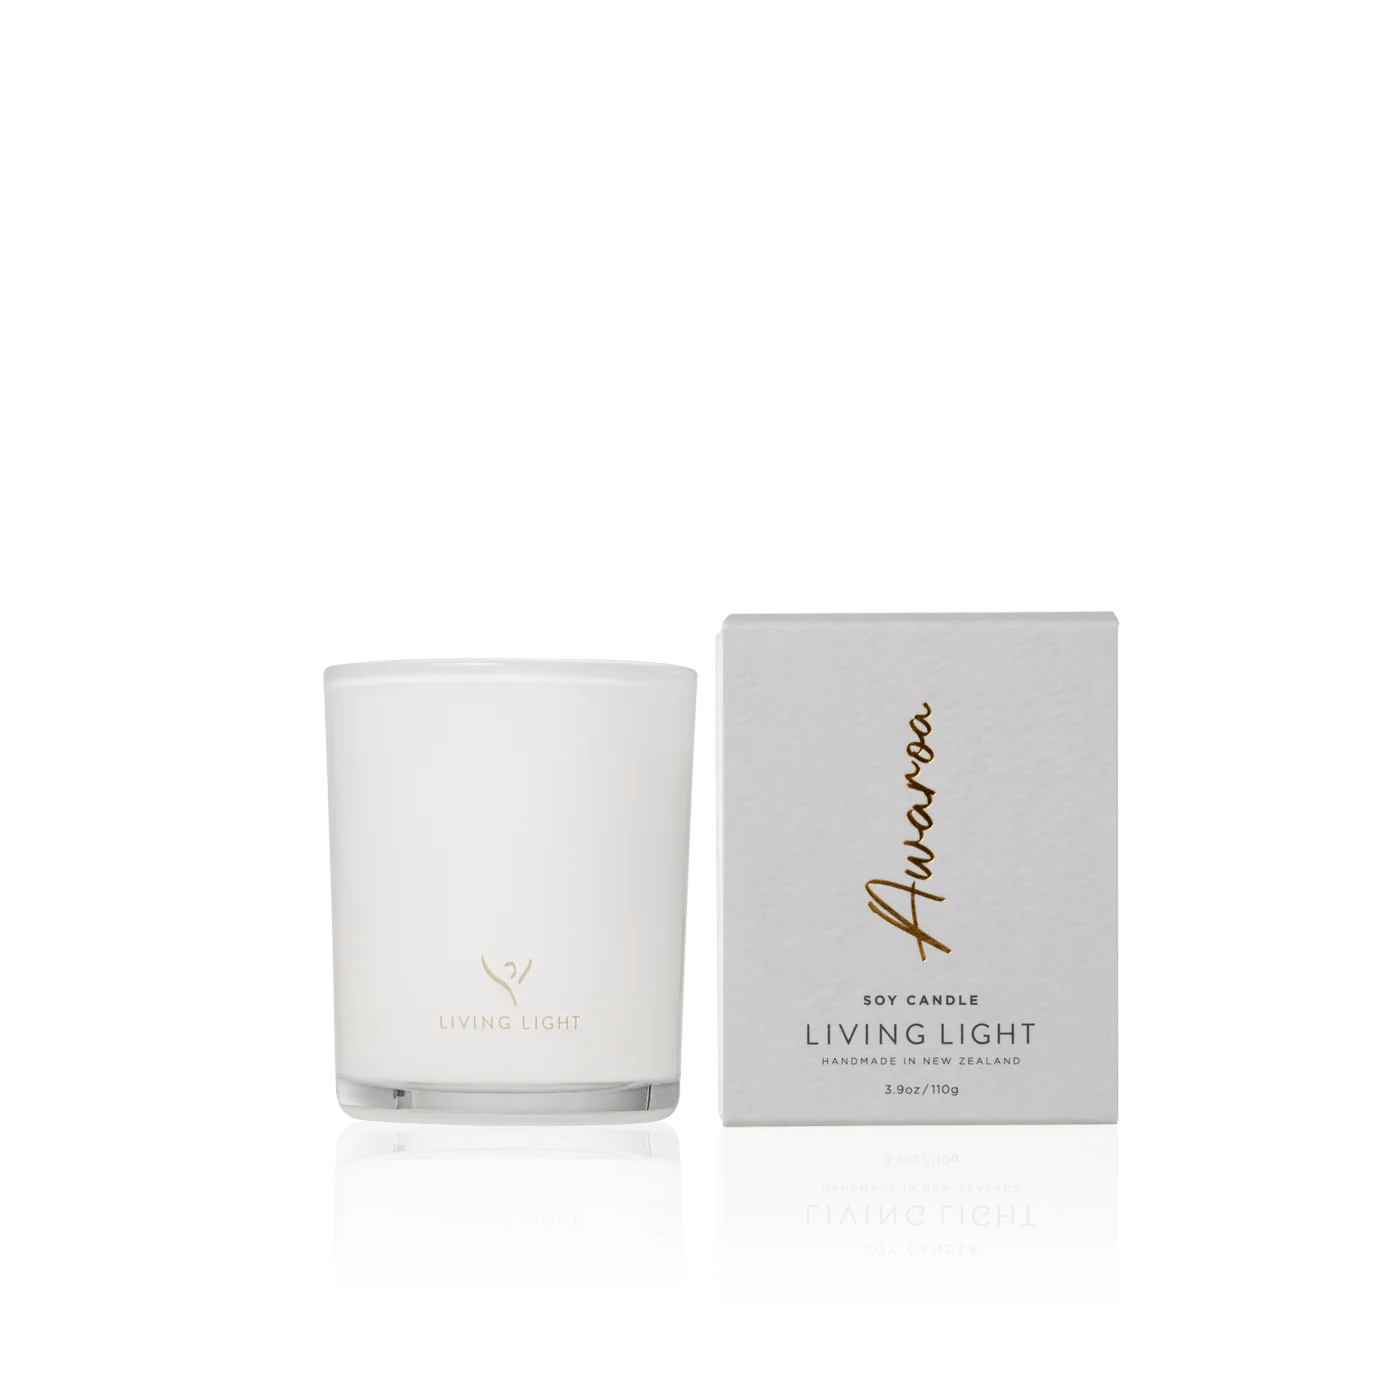 Living Light - Awaroa Soy Candle - The Flower Crate